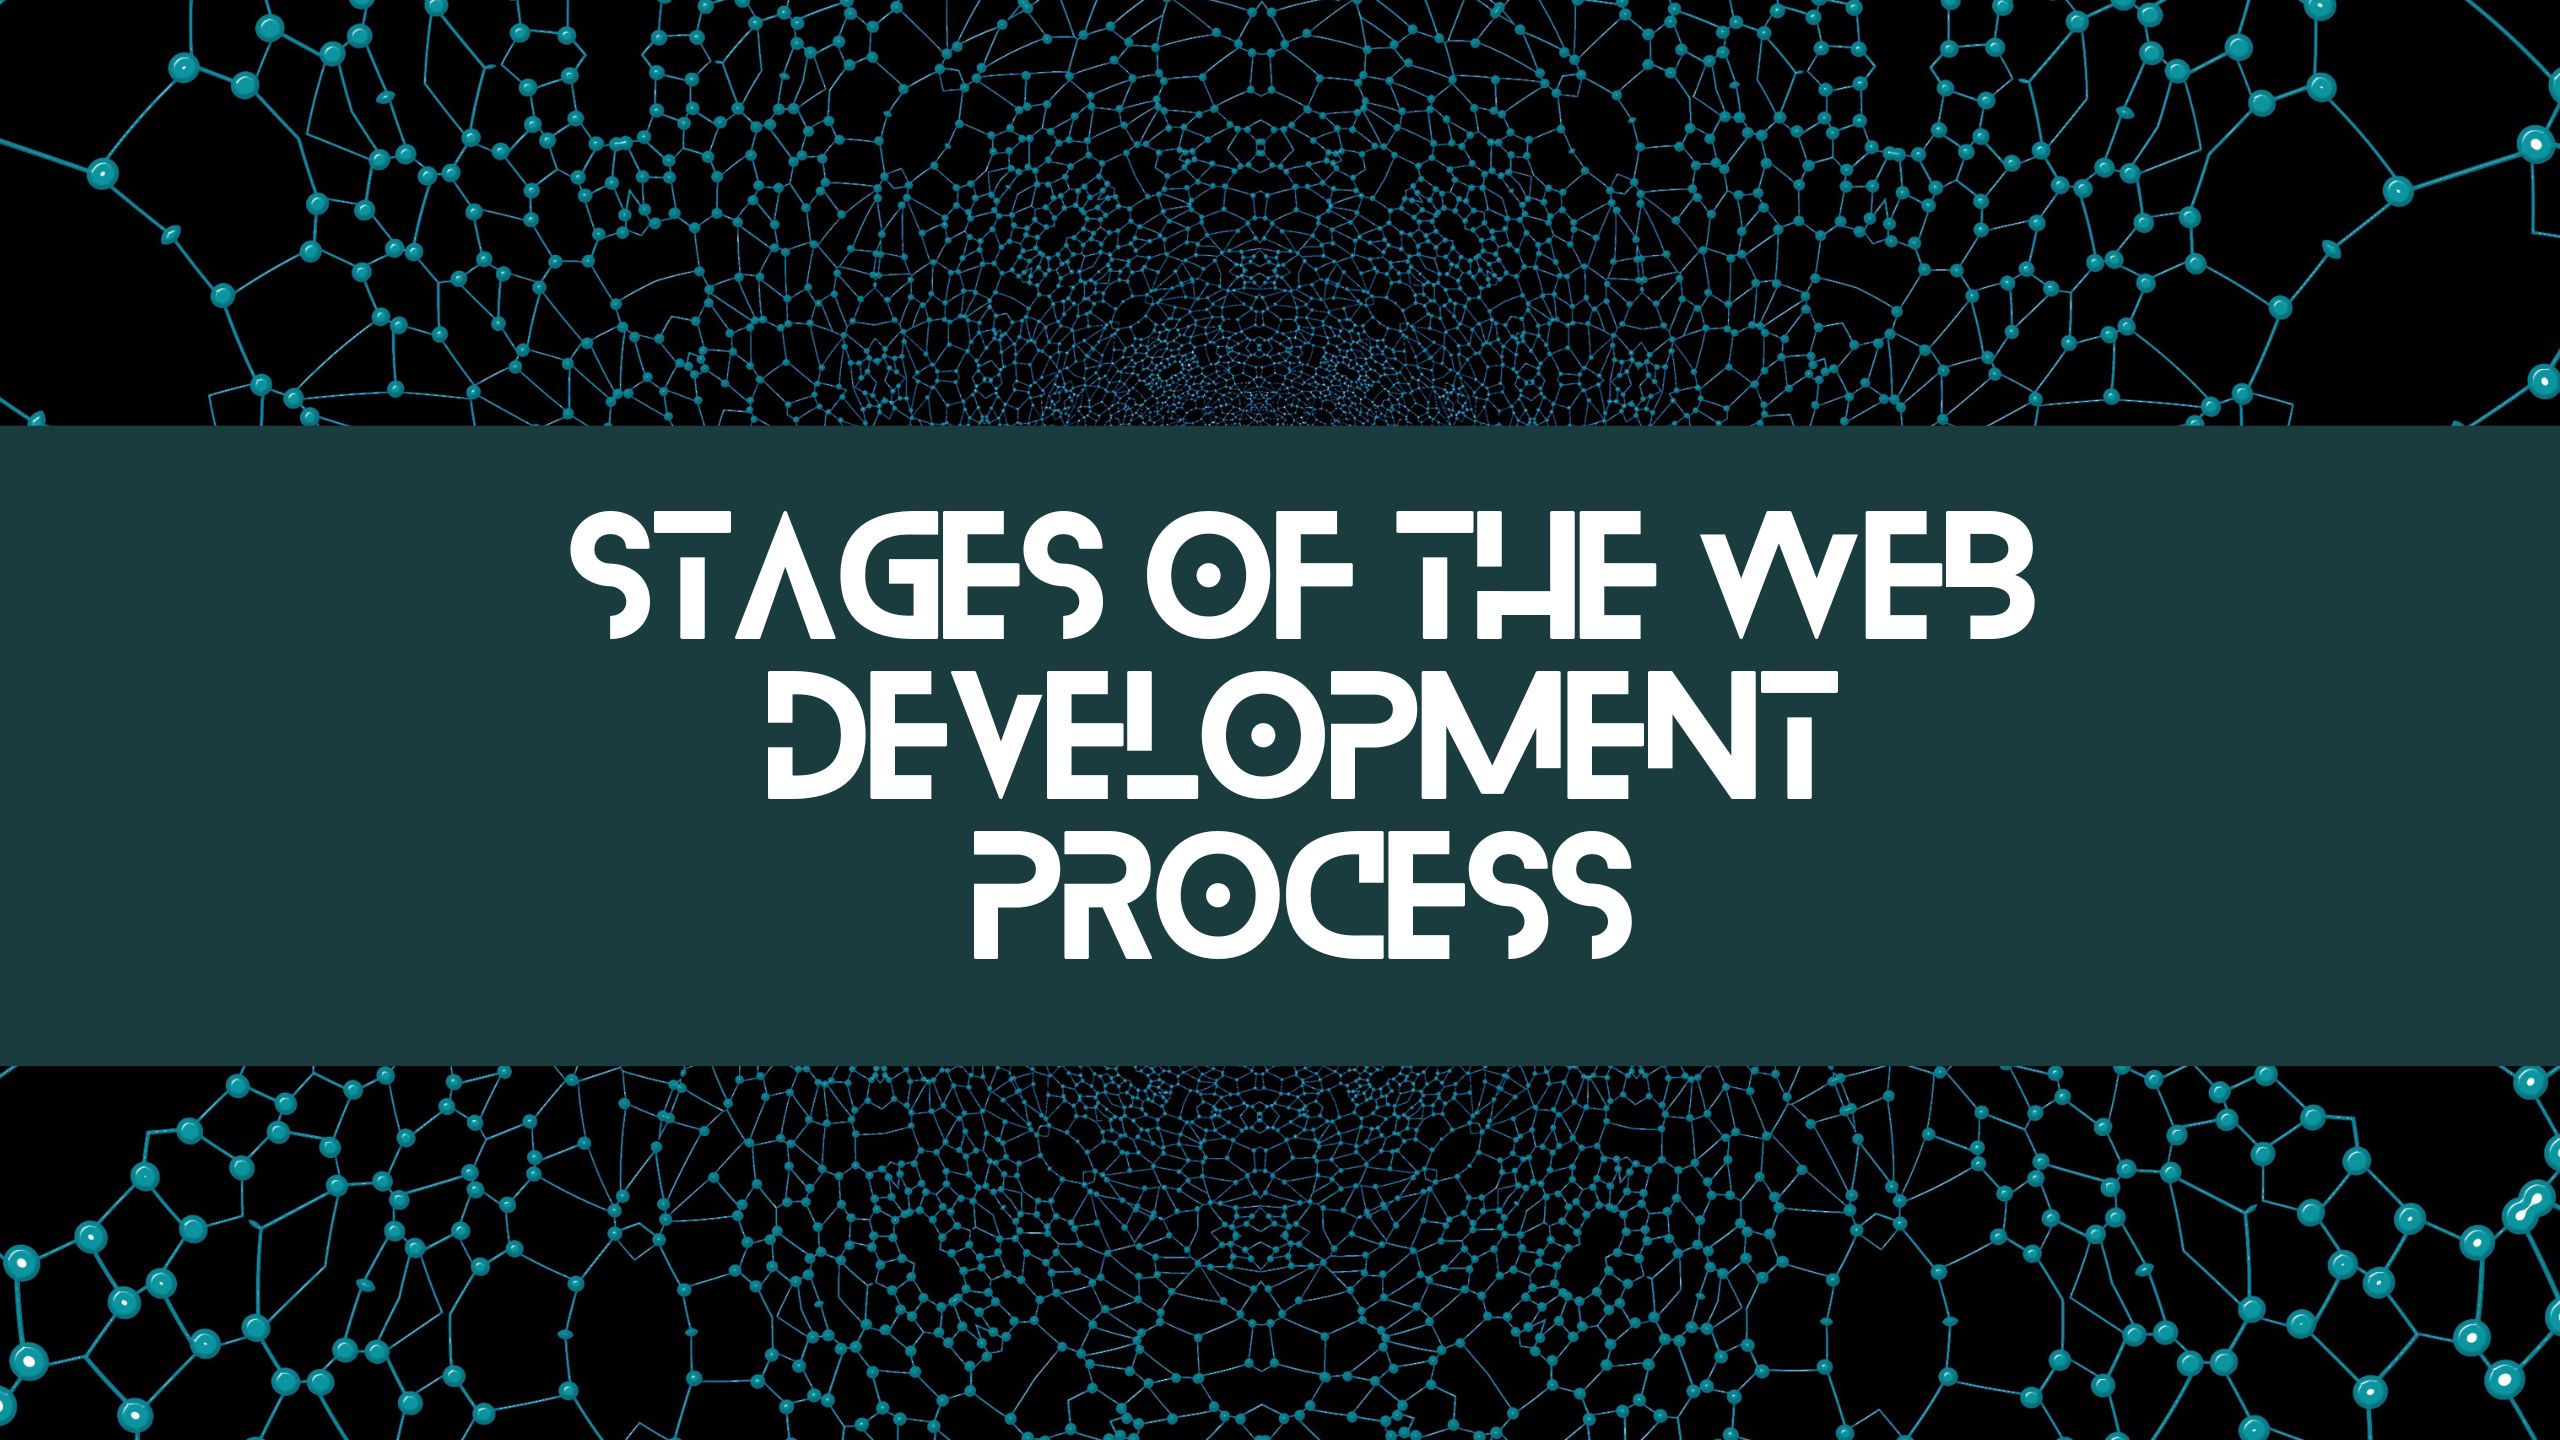 What are the different stages of the web development process?